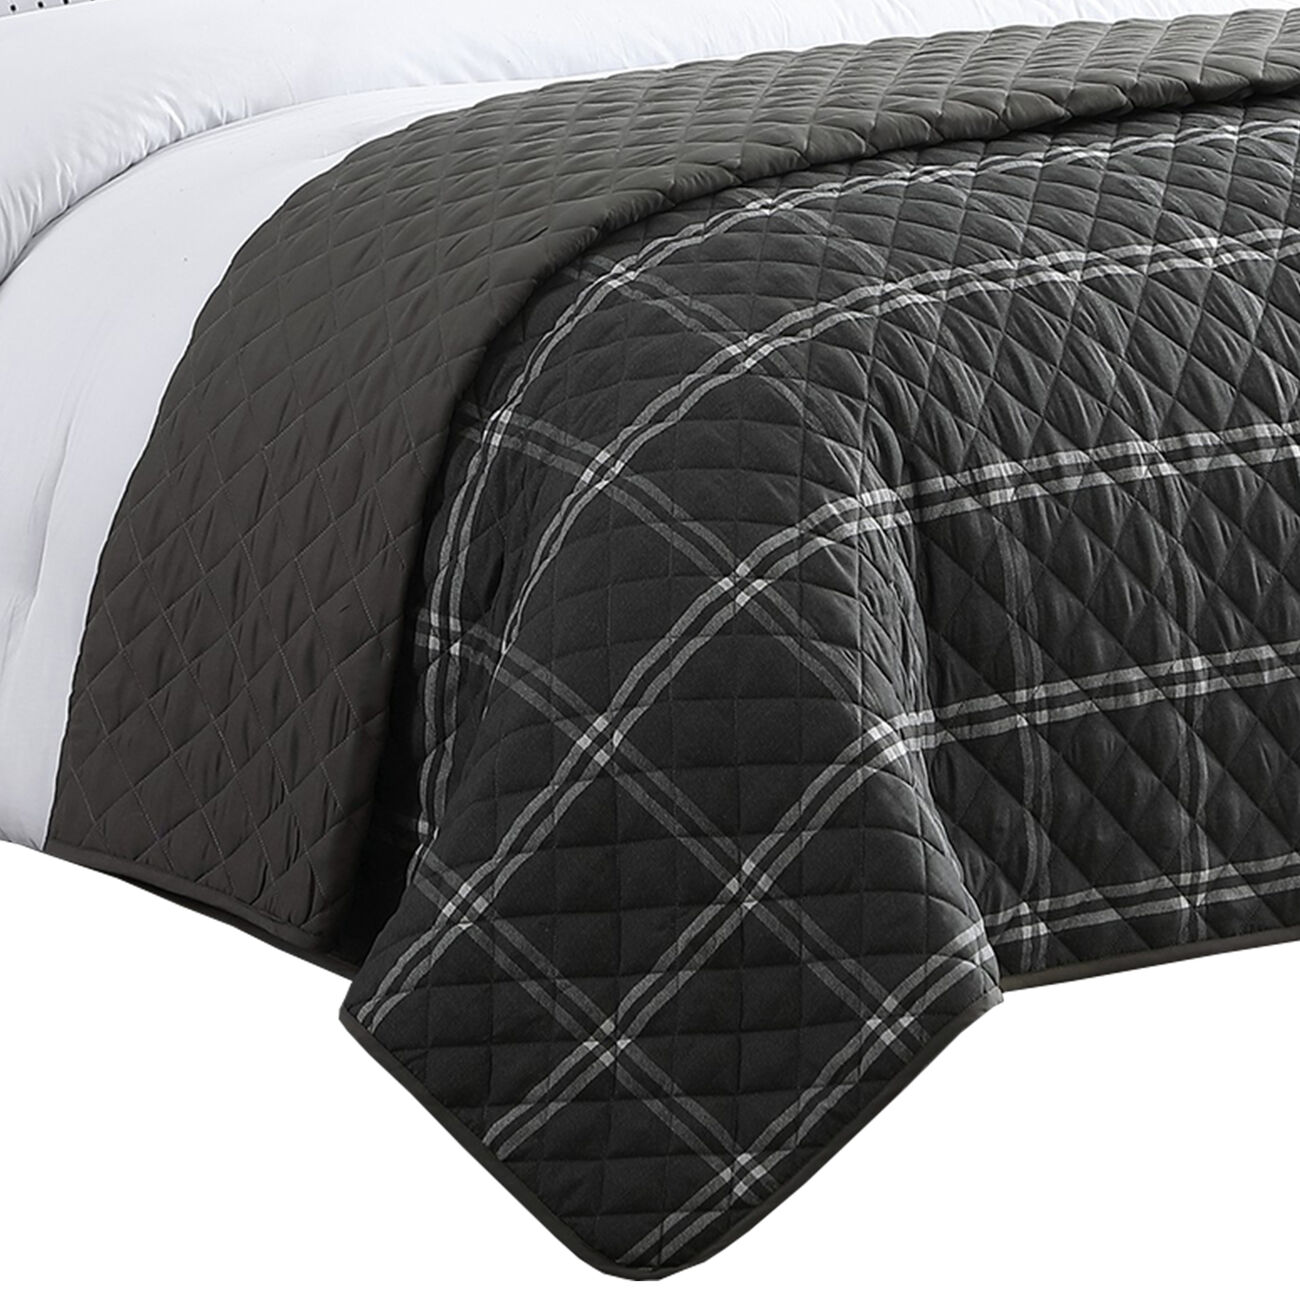 8 Piece King Size Fabric Comforter Set with Oversized Check Prints, Black